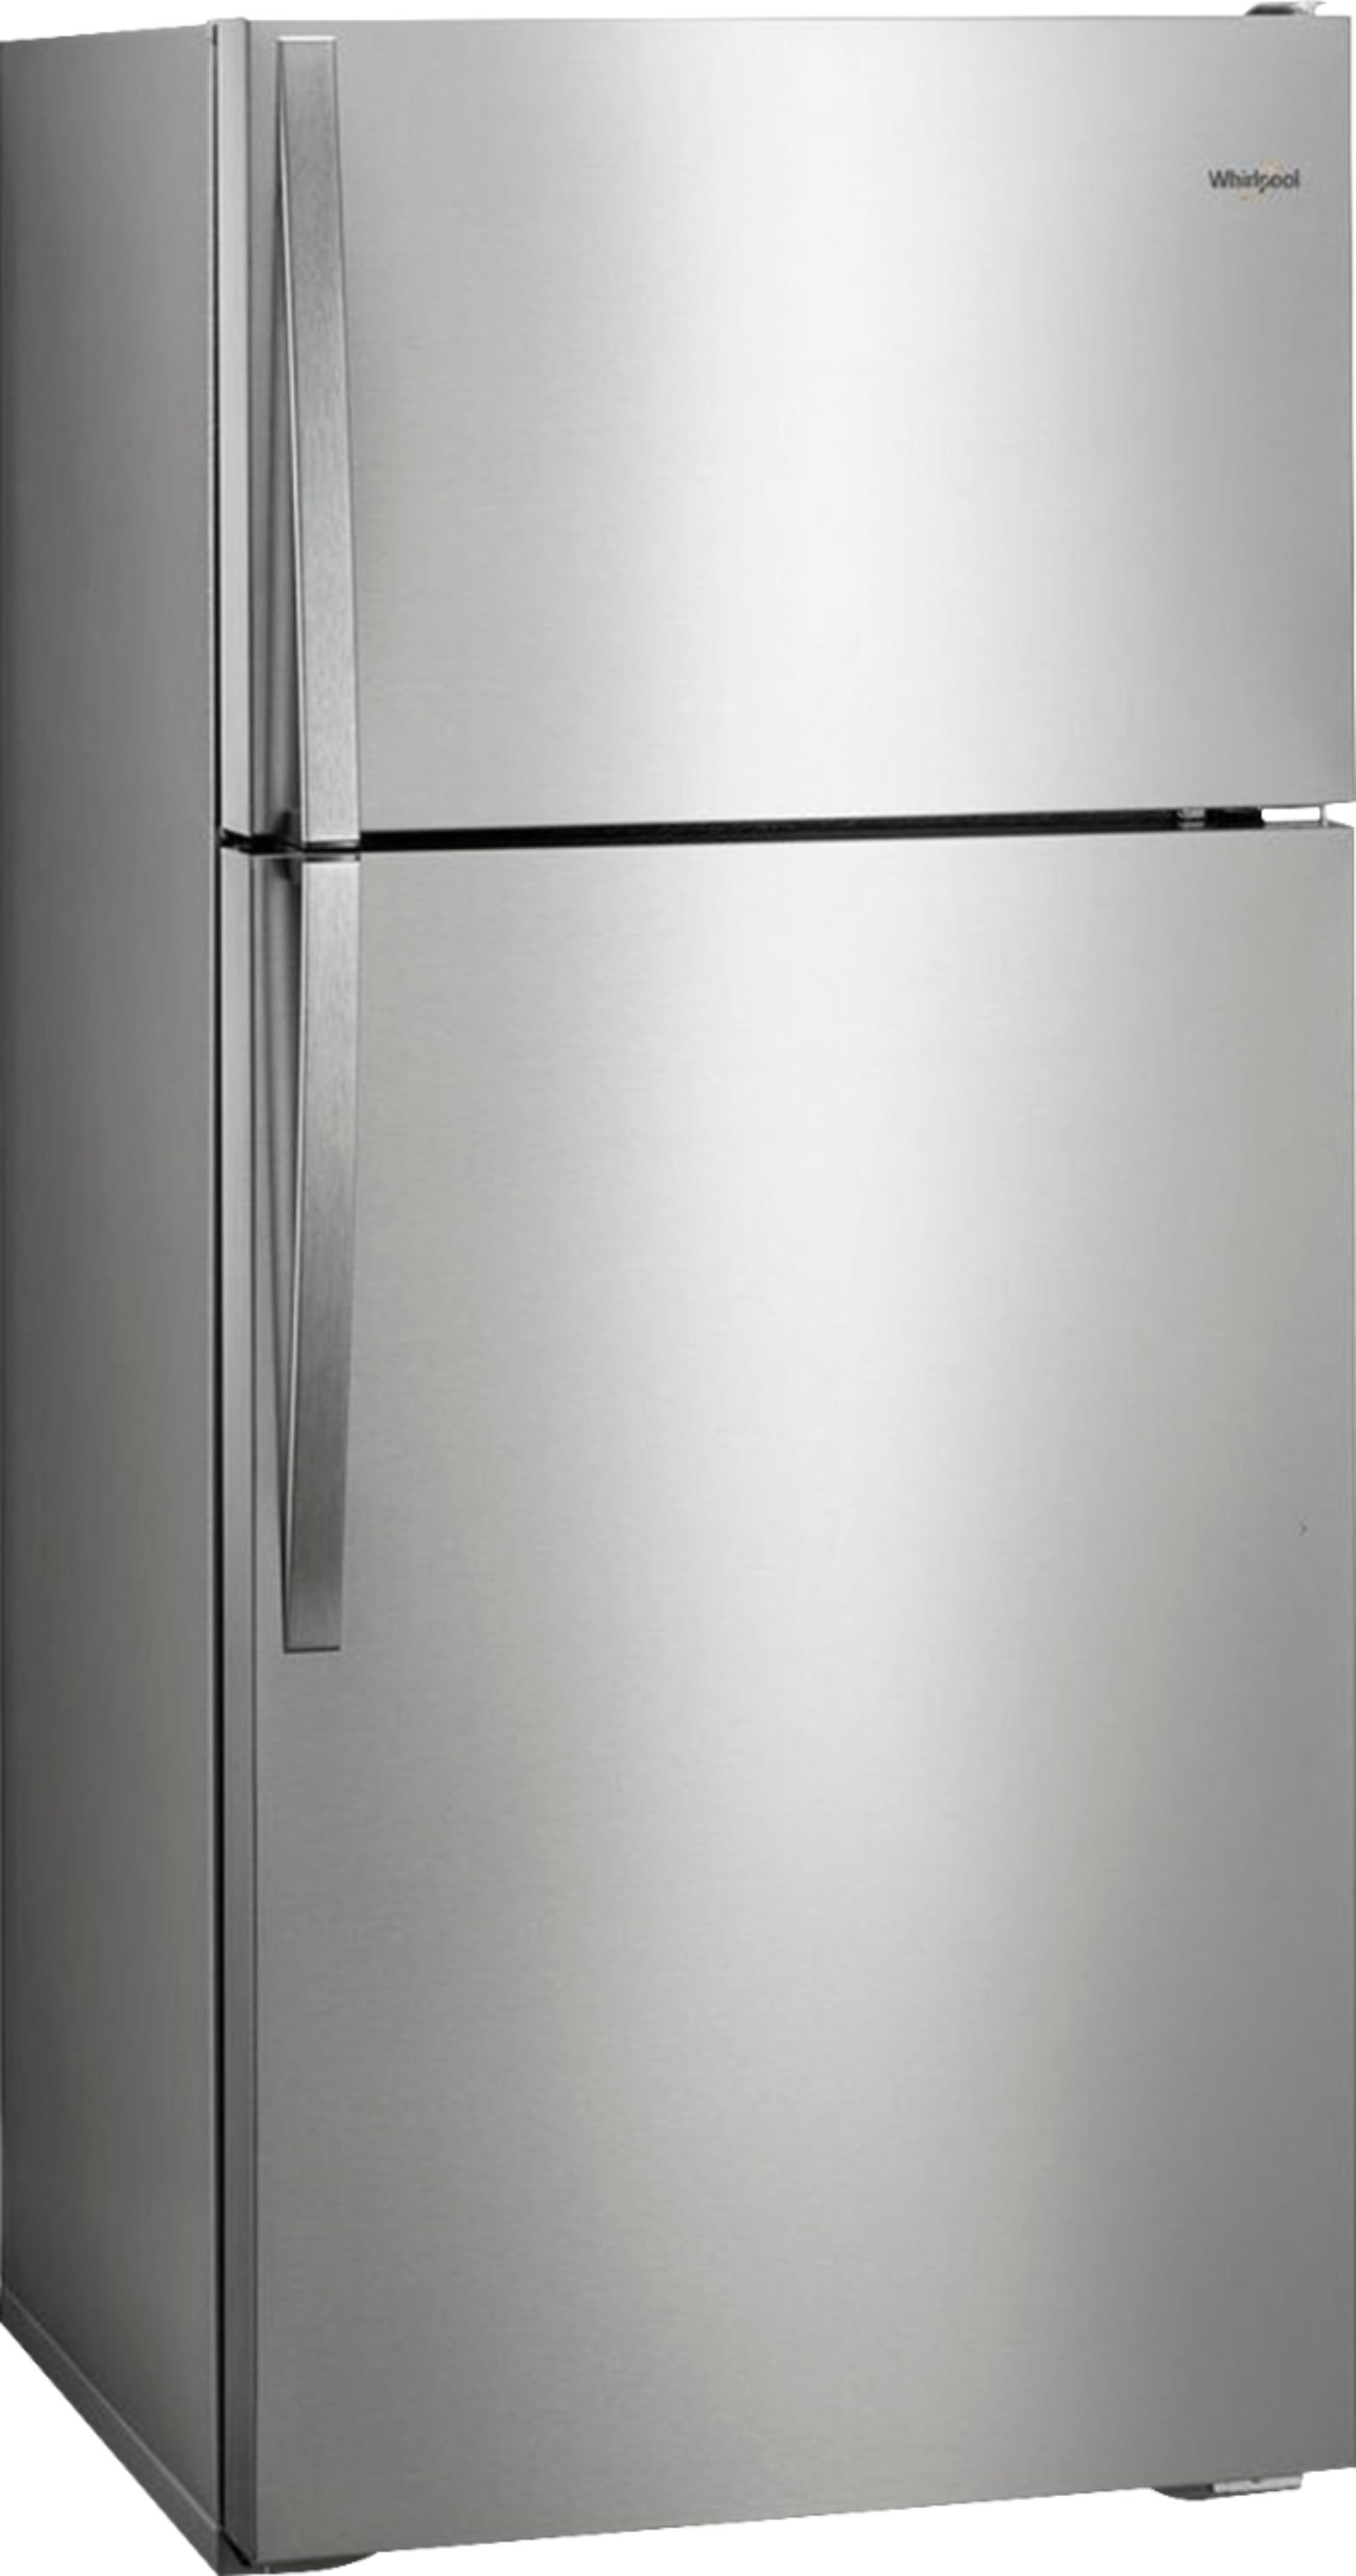 Angle View: Whirlpool - 5.1 Cu. Ft. Built-In Mini Fridge - Stainless steel